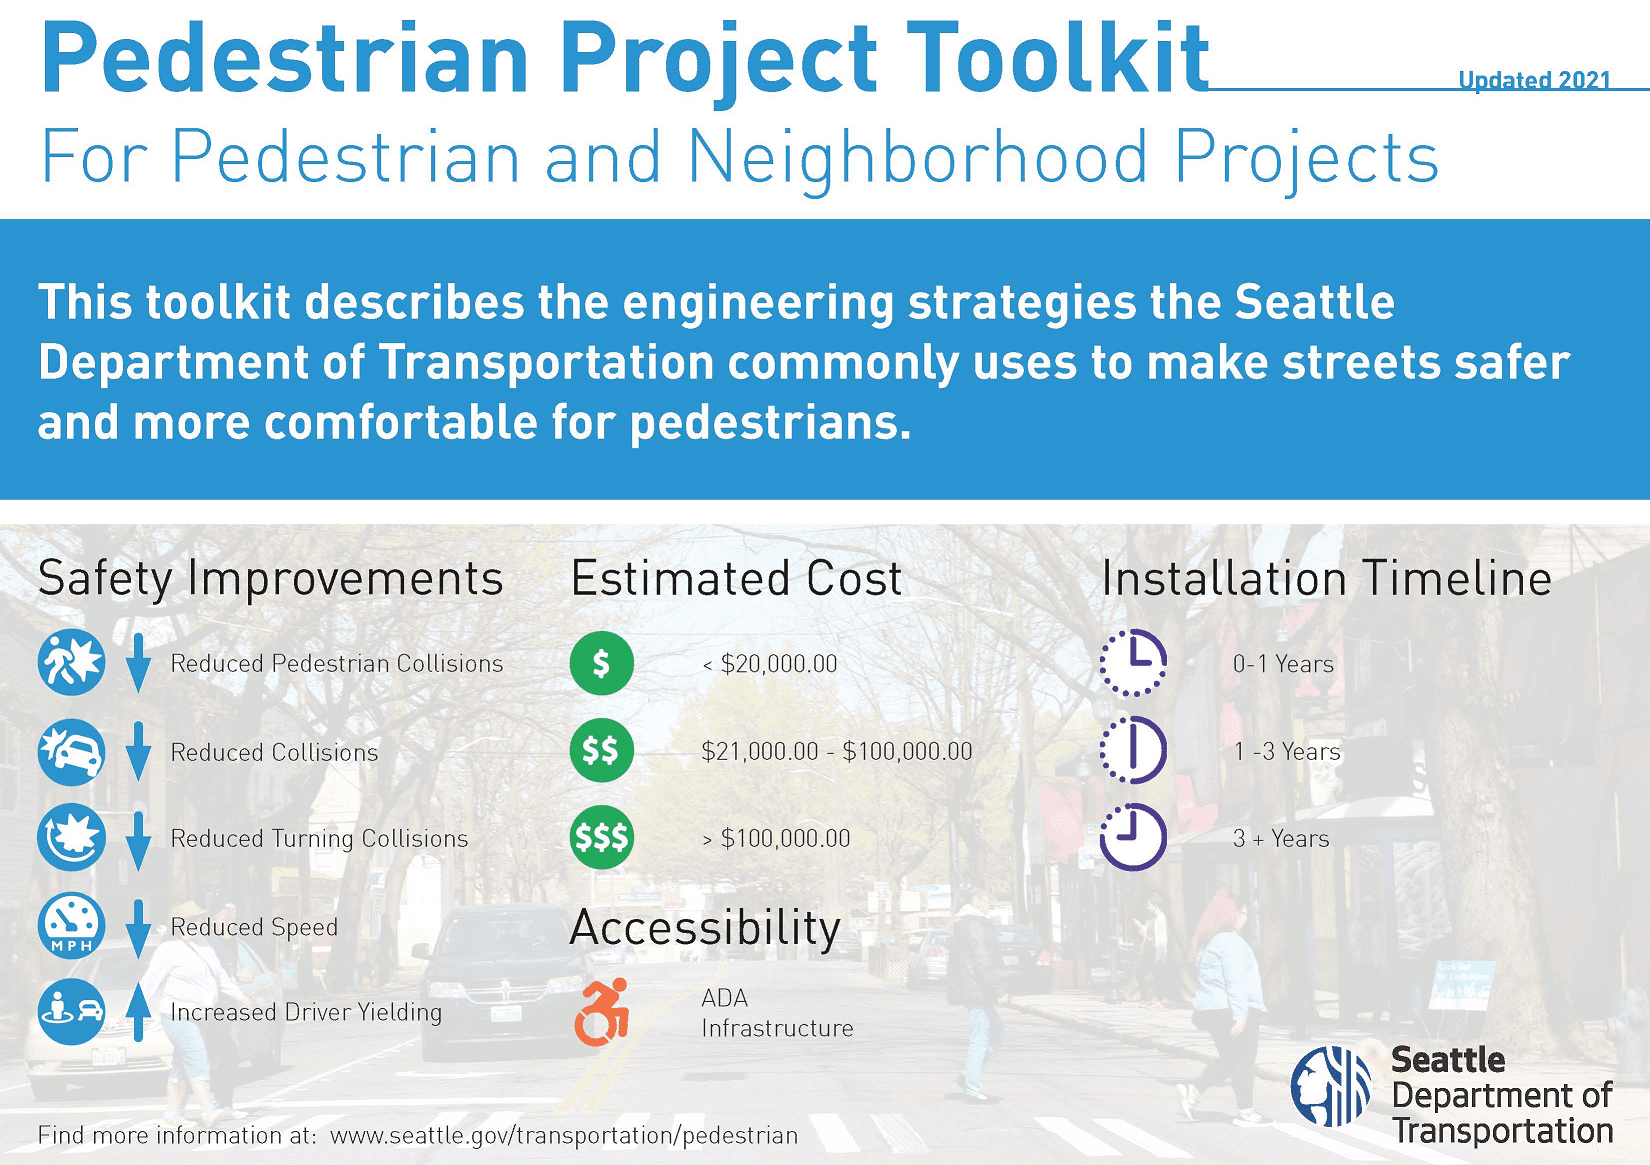 An overview on page 1 of our Pedestrian Projects Toolkit that explains the various factors covered in the toolkit, such as cost, installation timeline, and accessibility, for a range of pedestrian safety infrastructure improvements.